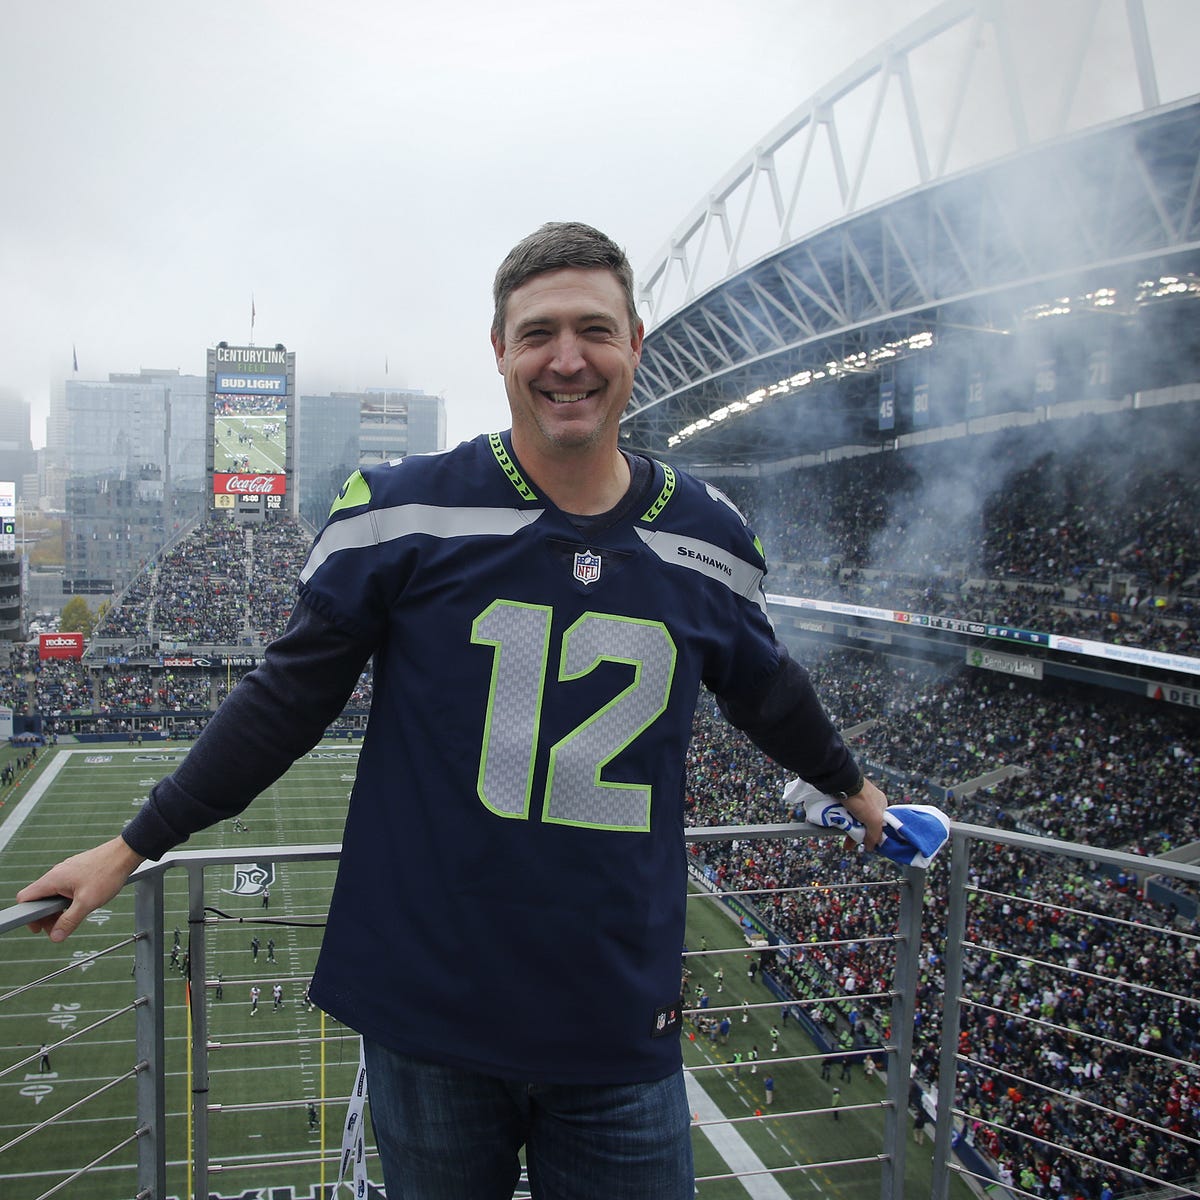 Dan Wilson Raises the 12 Flag at the Seahawks Game – From the Corner of ...